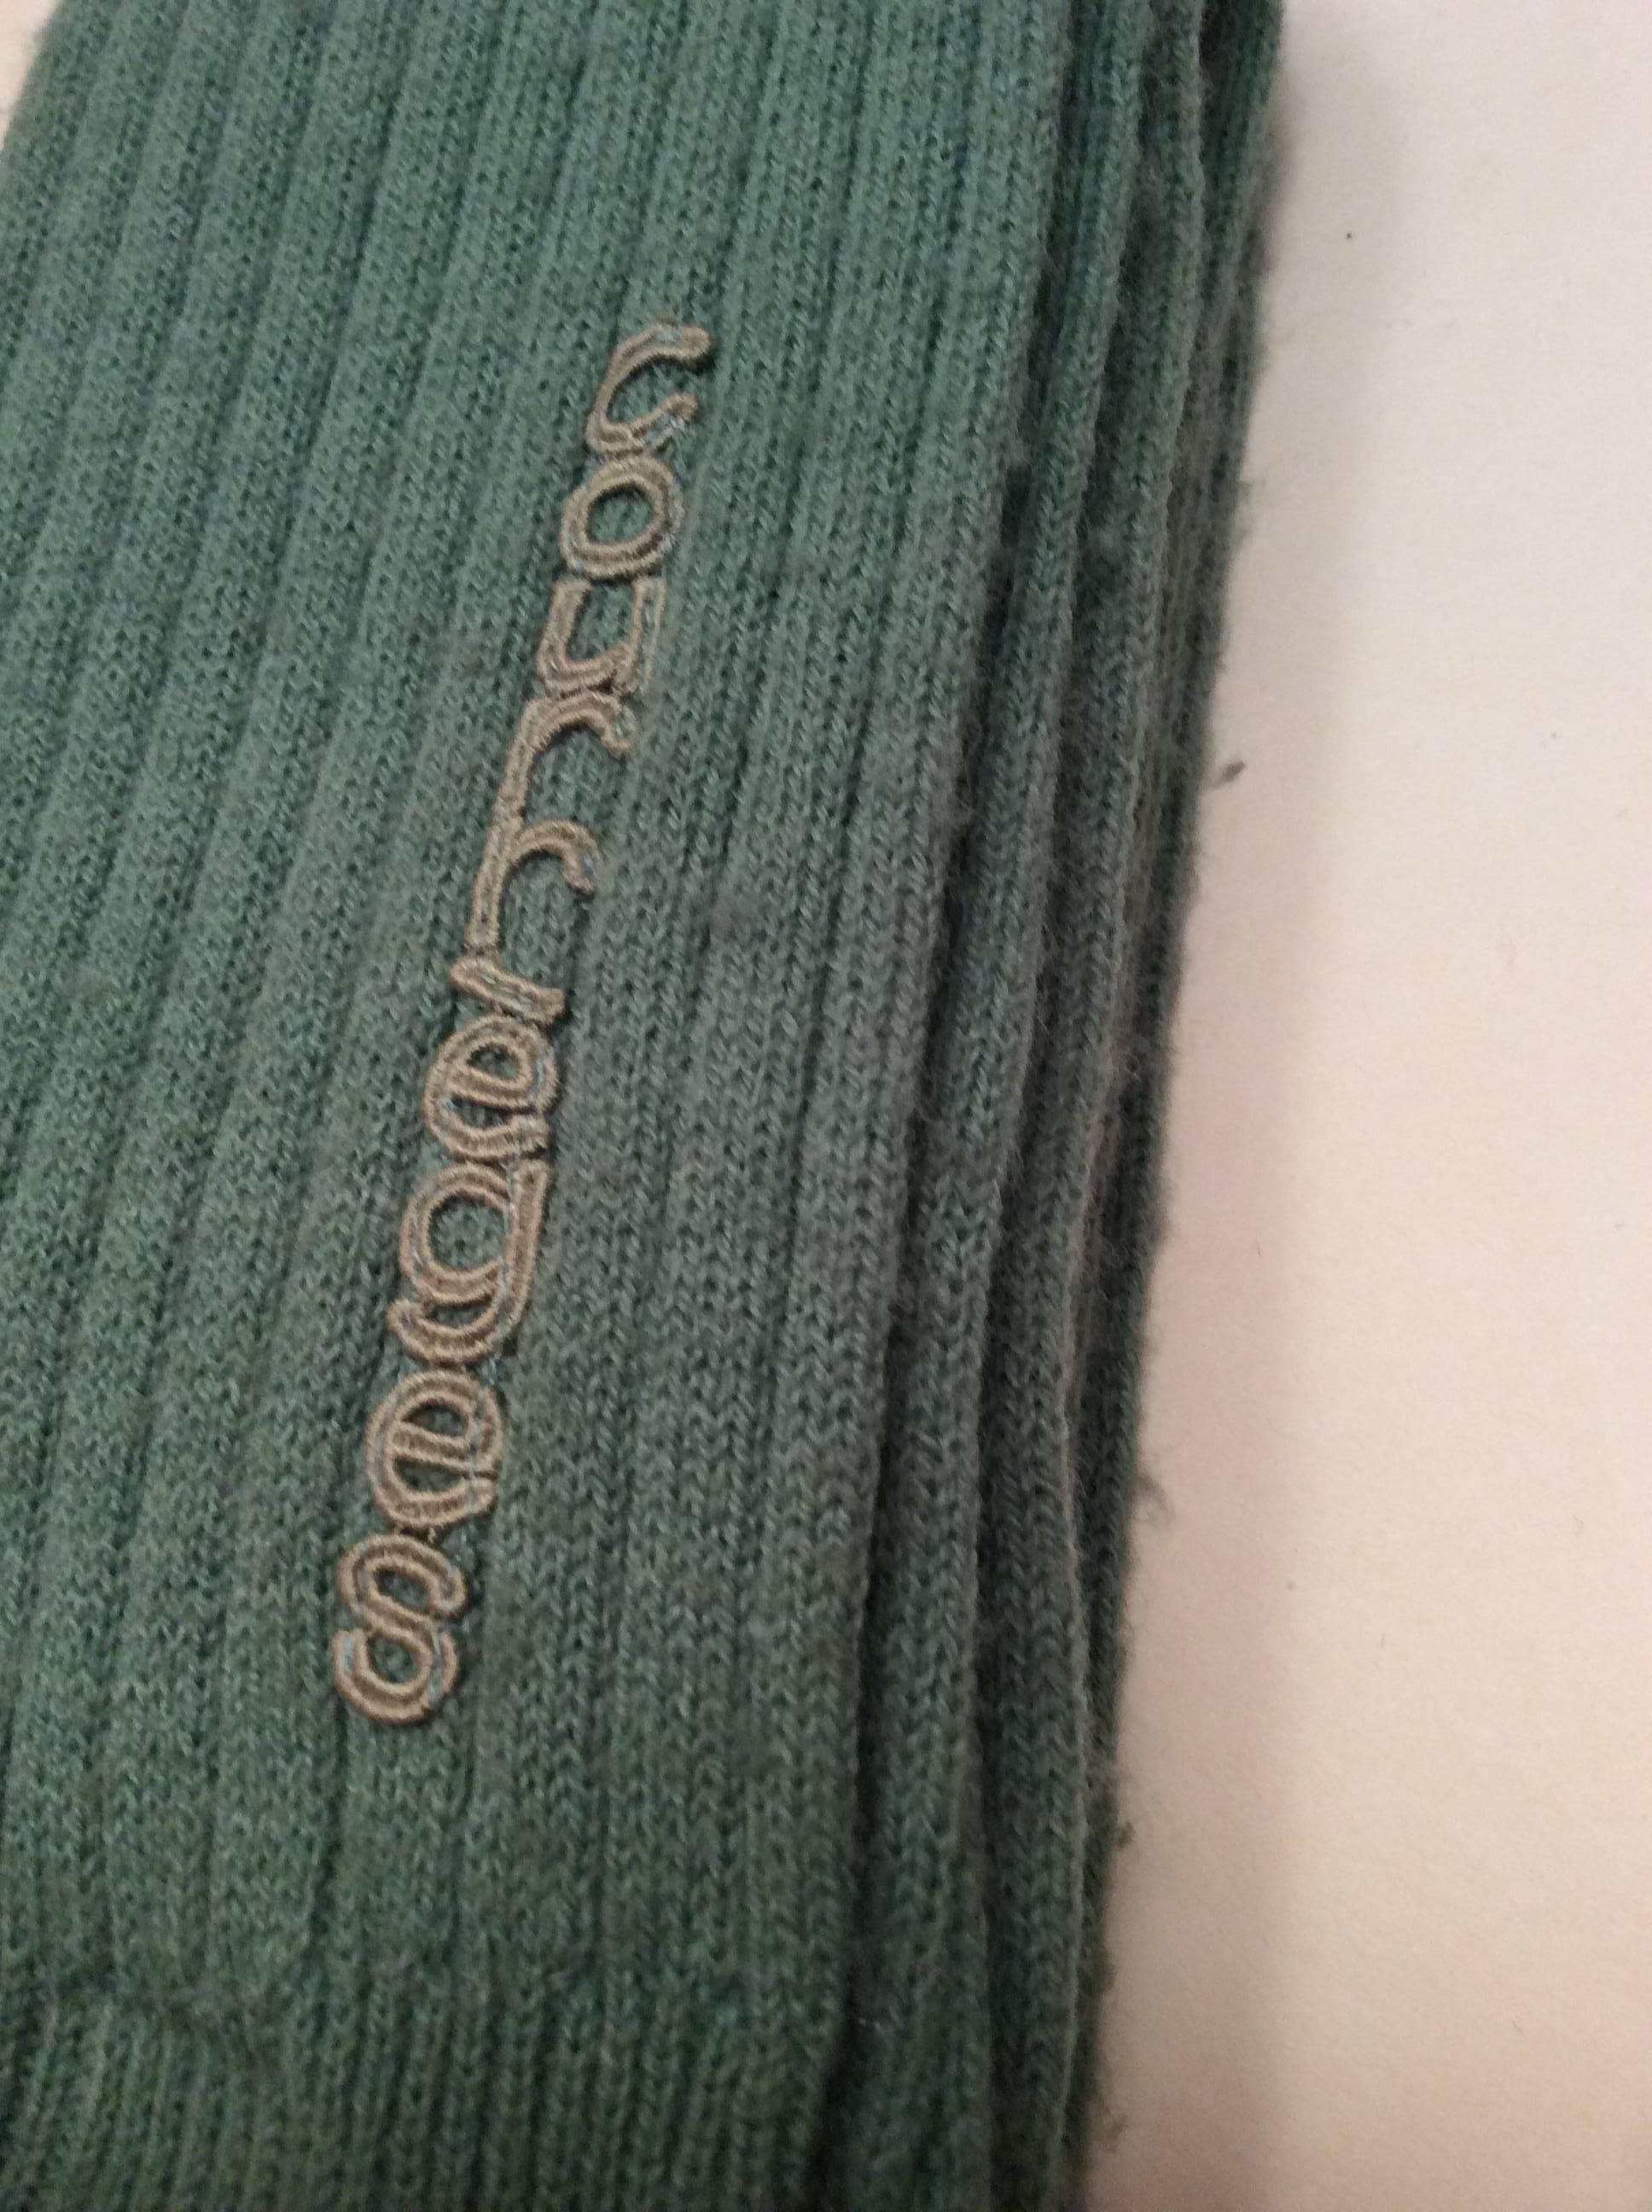 Rare 1970's Courreges Glove and Scarf Set - Wool In Excellent Condition For Sale In Boca Raton, FL